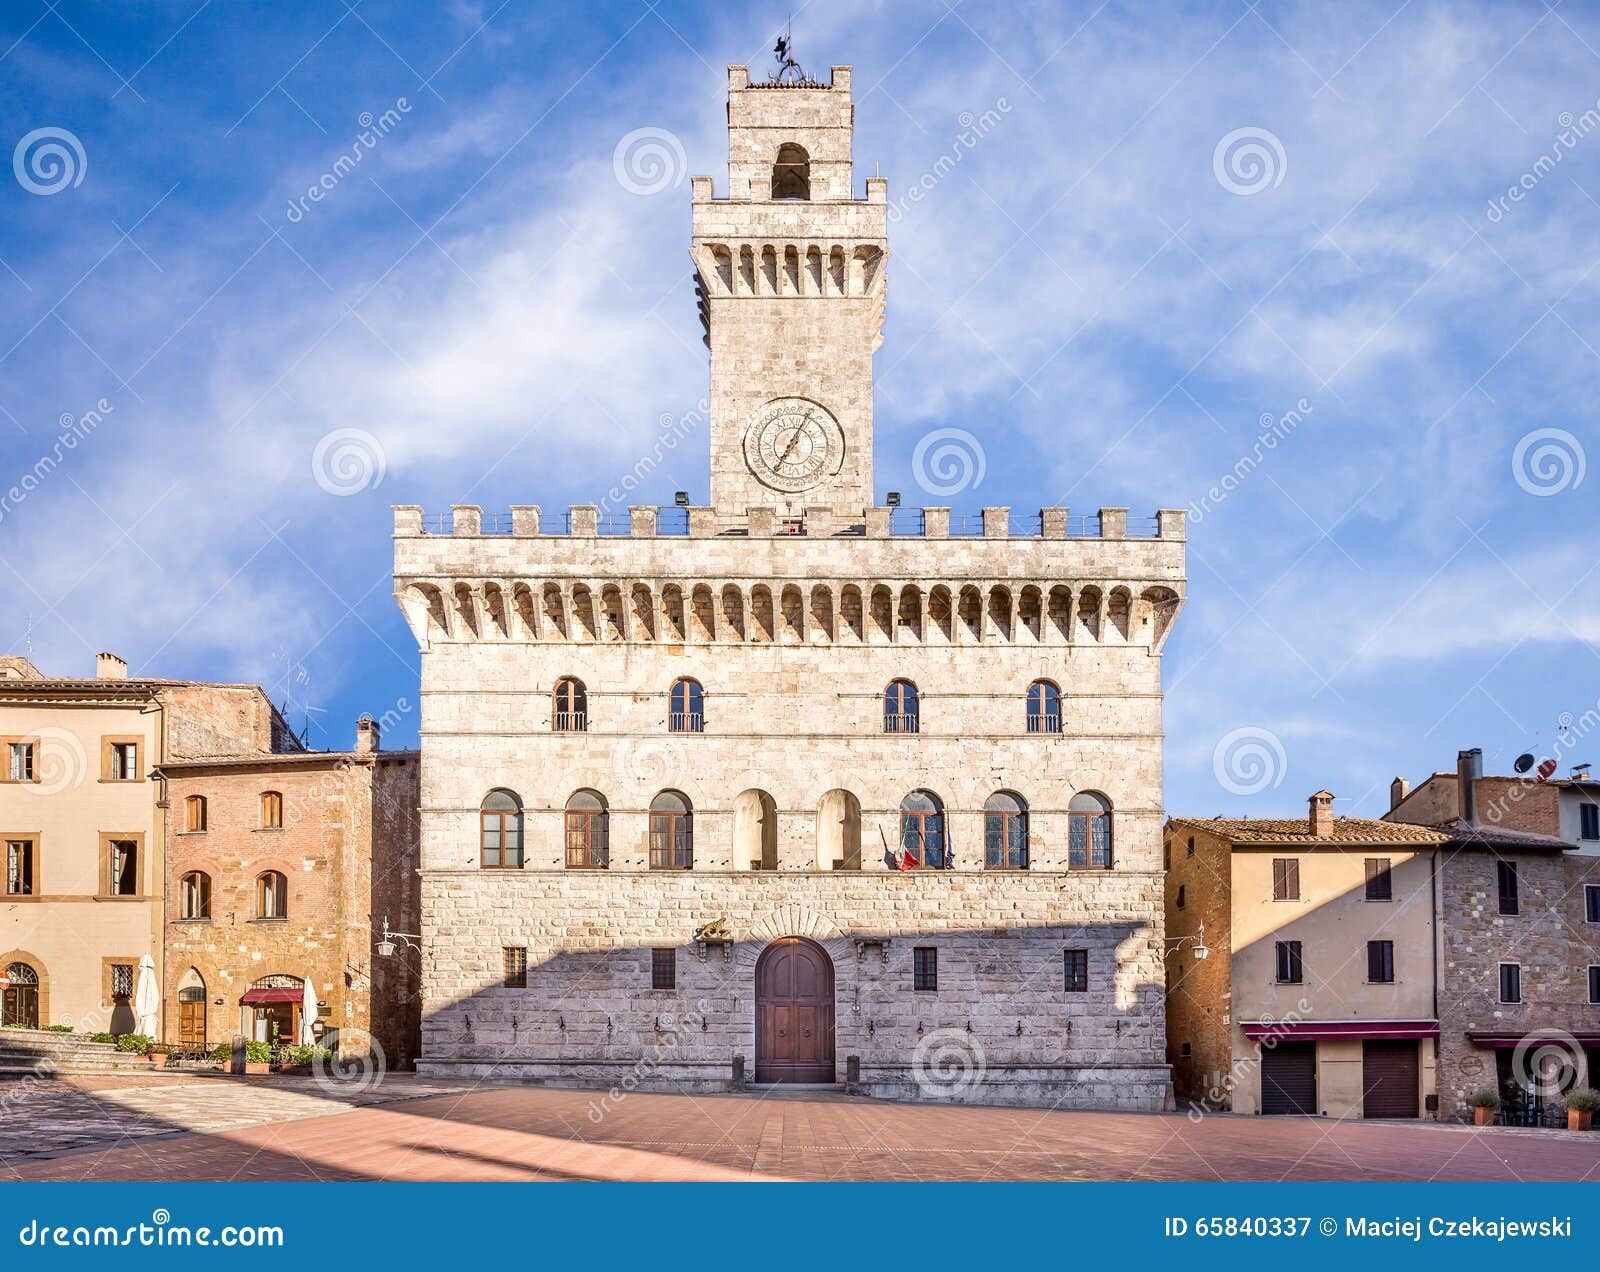 palazzo comunale (town hall) in montepulciano